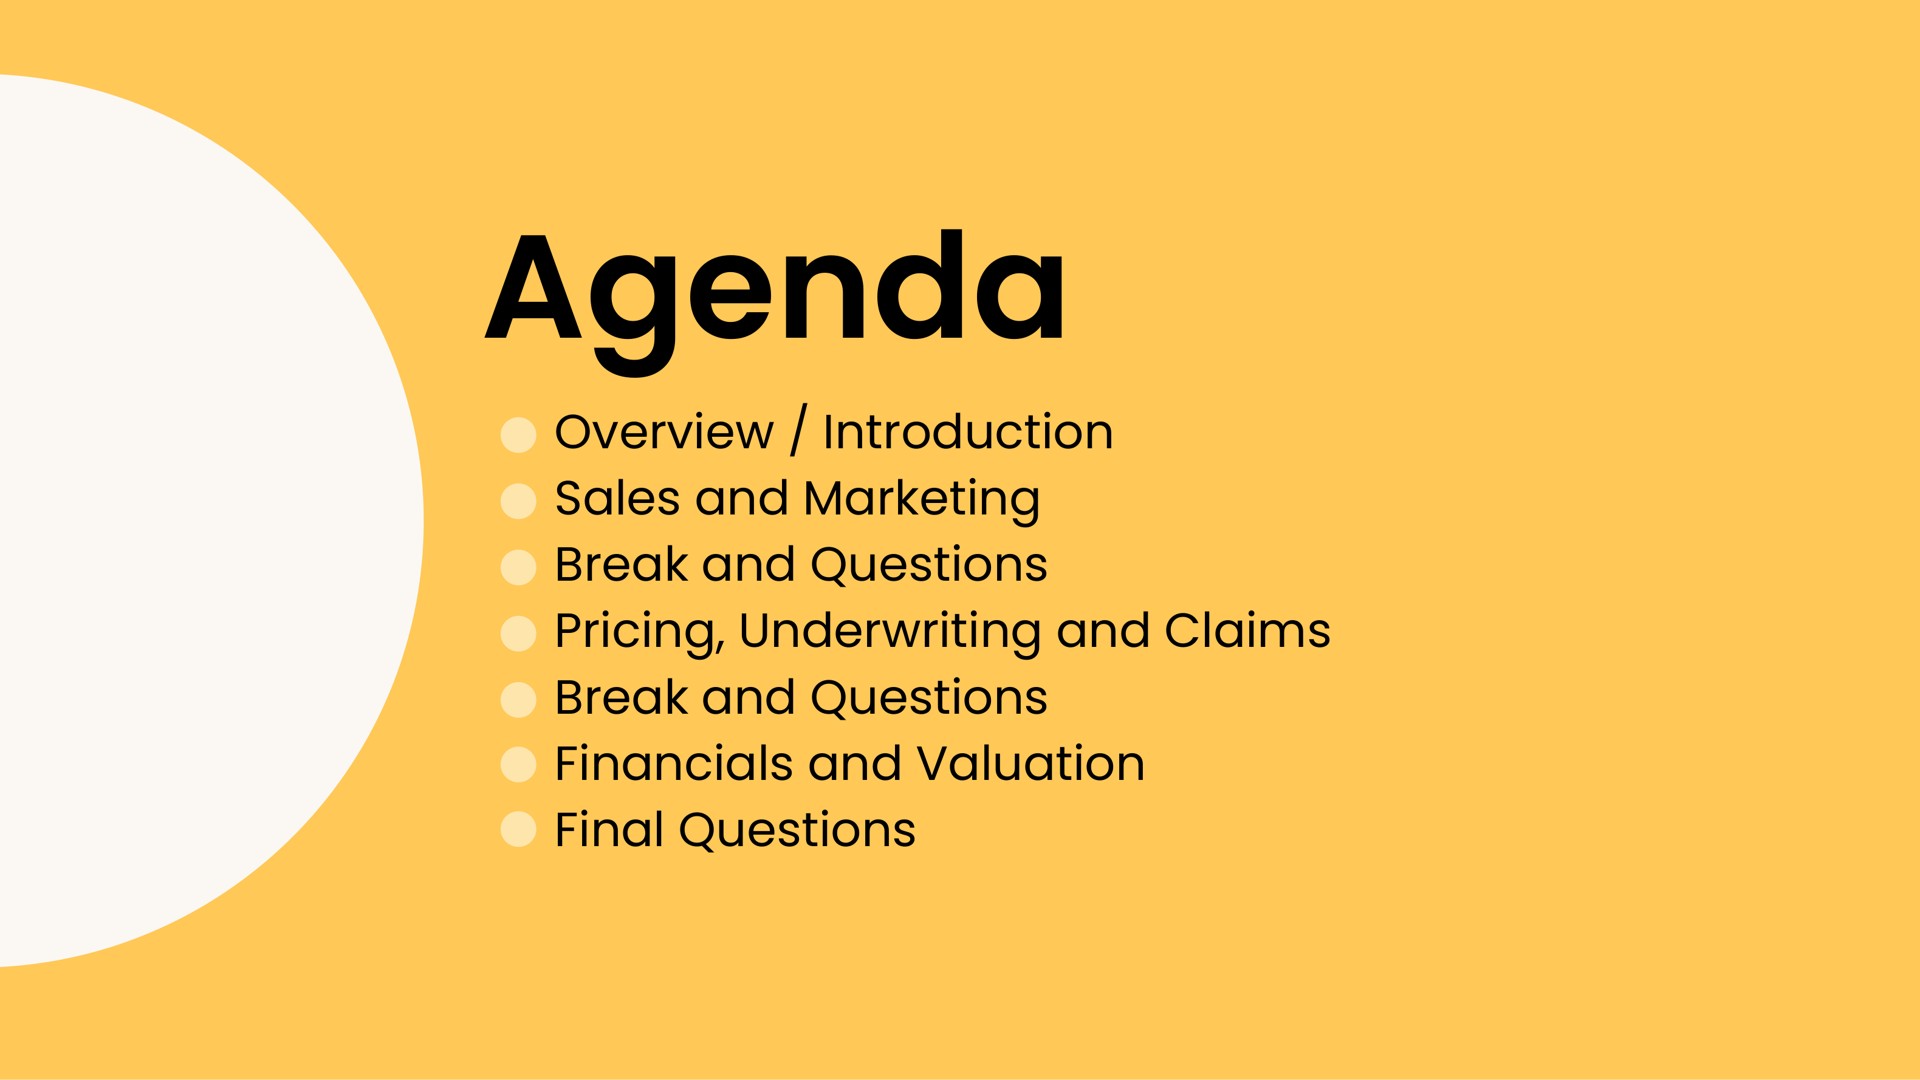 agenda overview introduction sales and marketing break and questions pricing underwriting and claims break and questions and valuation final questions | Kin